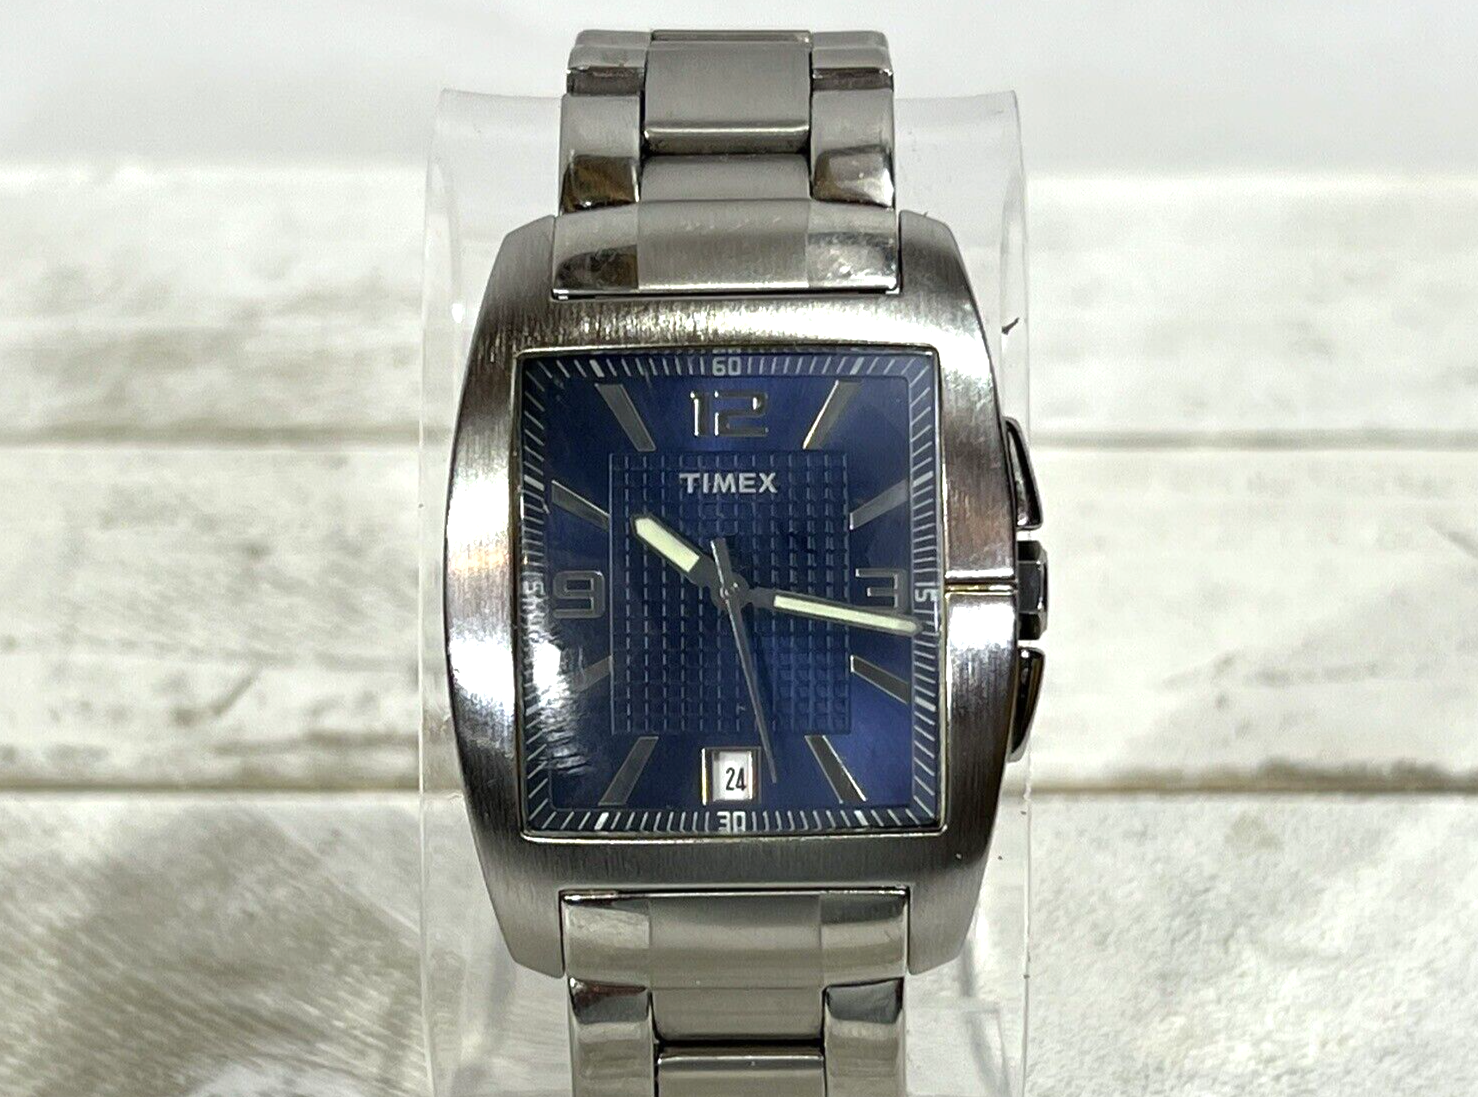 SOLD 1971 Timex blue dial square cased watch - Birth Year Watches